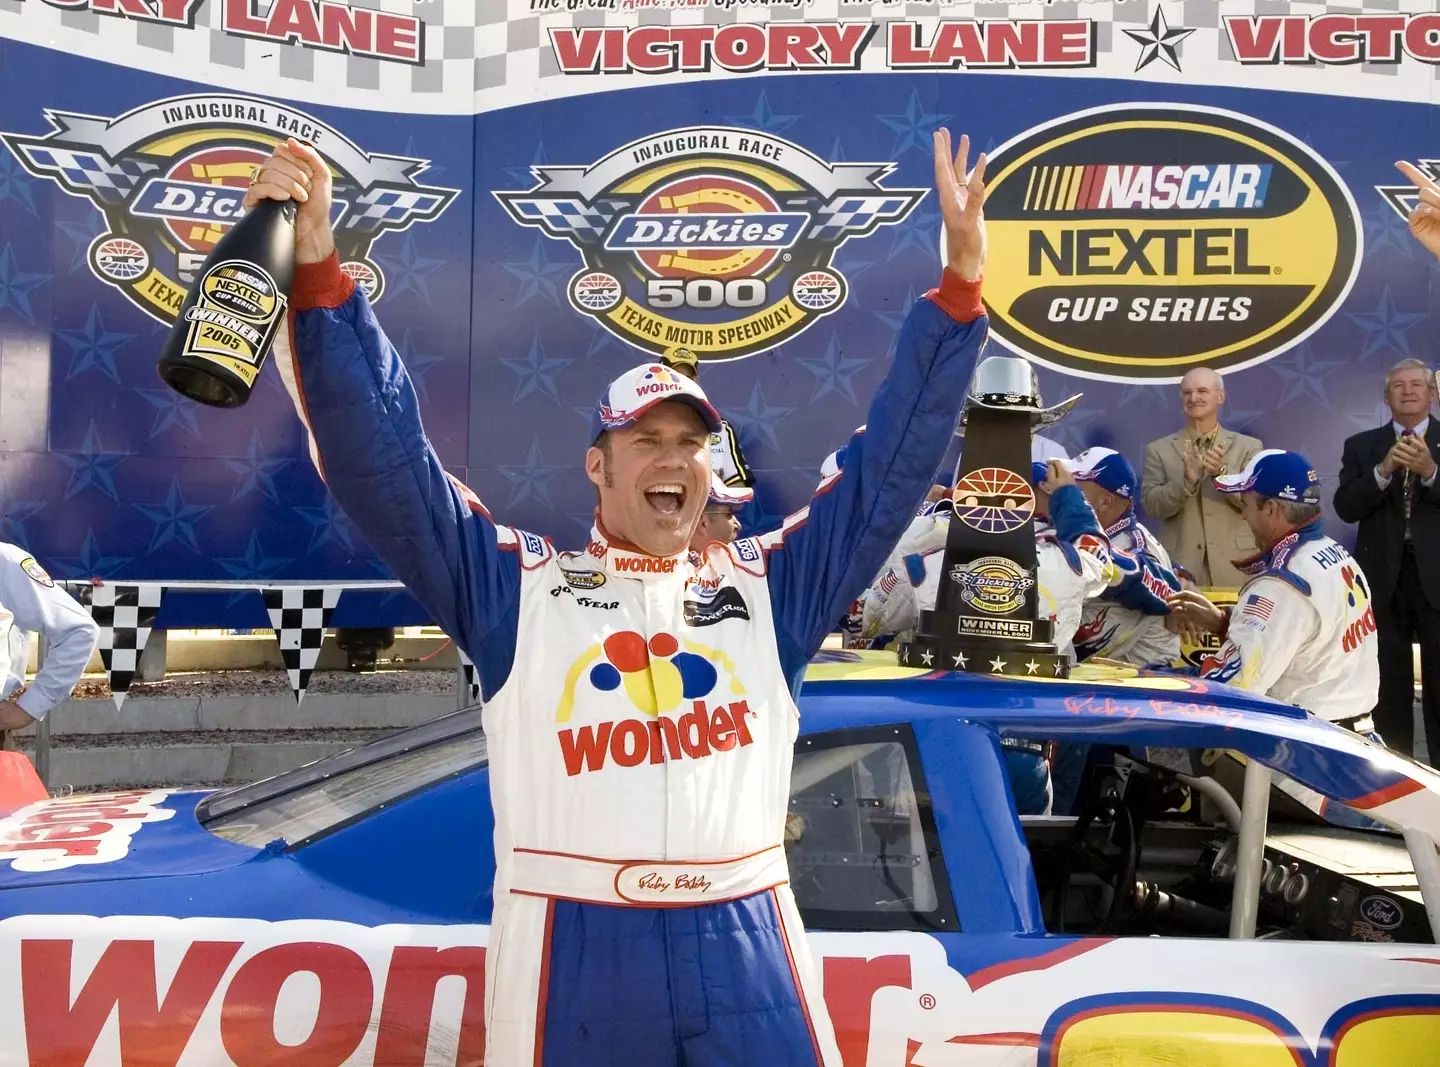 Chastain has drawn comparisons to perhaps the most famous NASCAR driver of all time - Ricky Bobby.